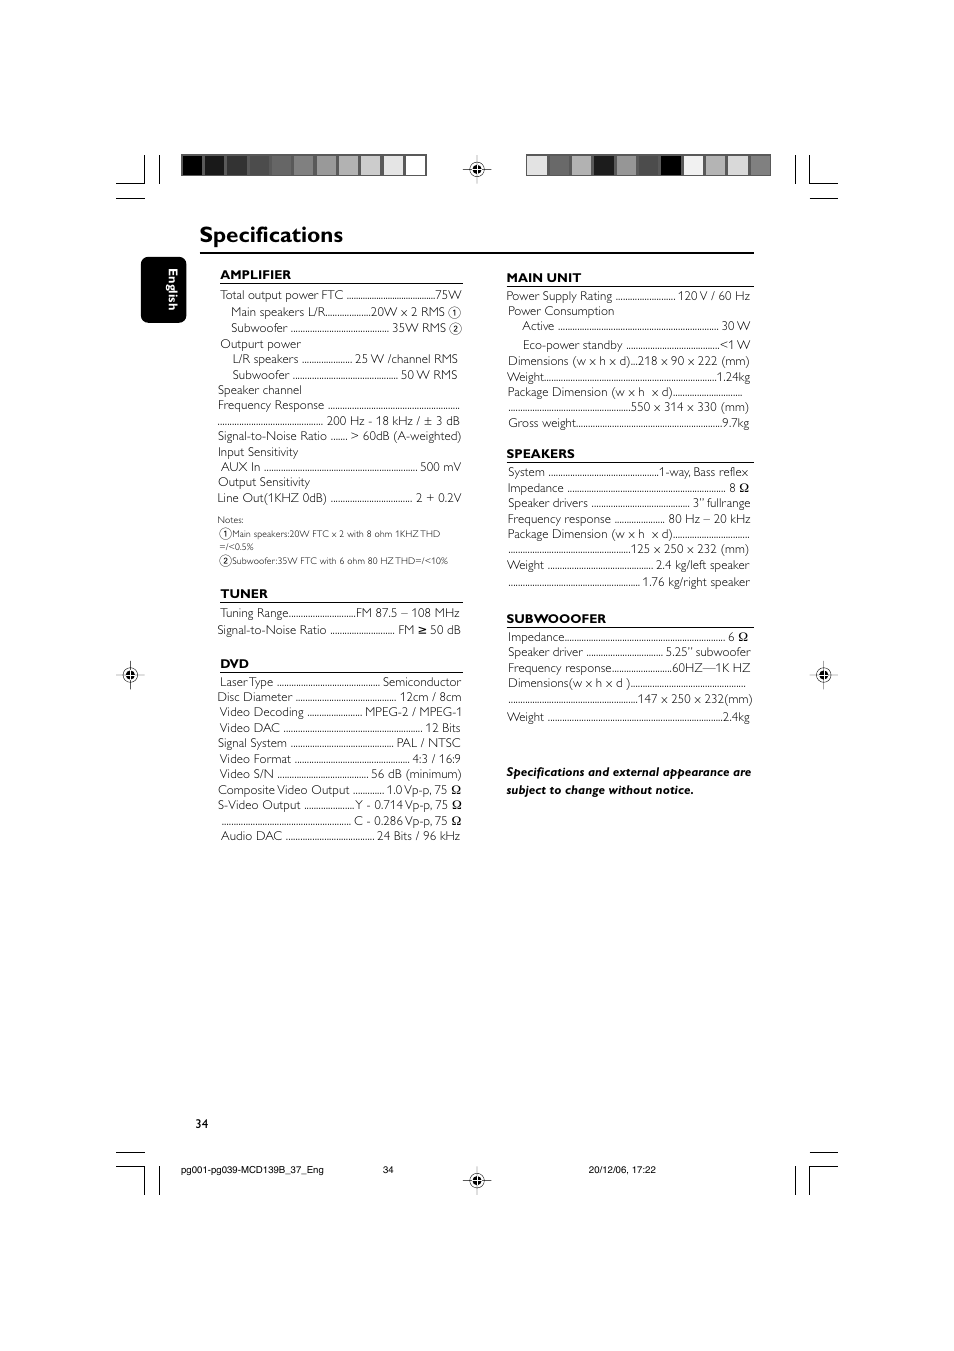 Specifications | Philips DVD Micro Theater MCD139B User Manual | Page 34 /  40 | Original mode